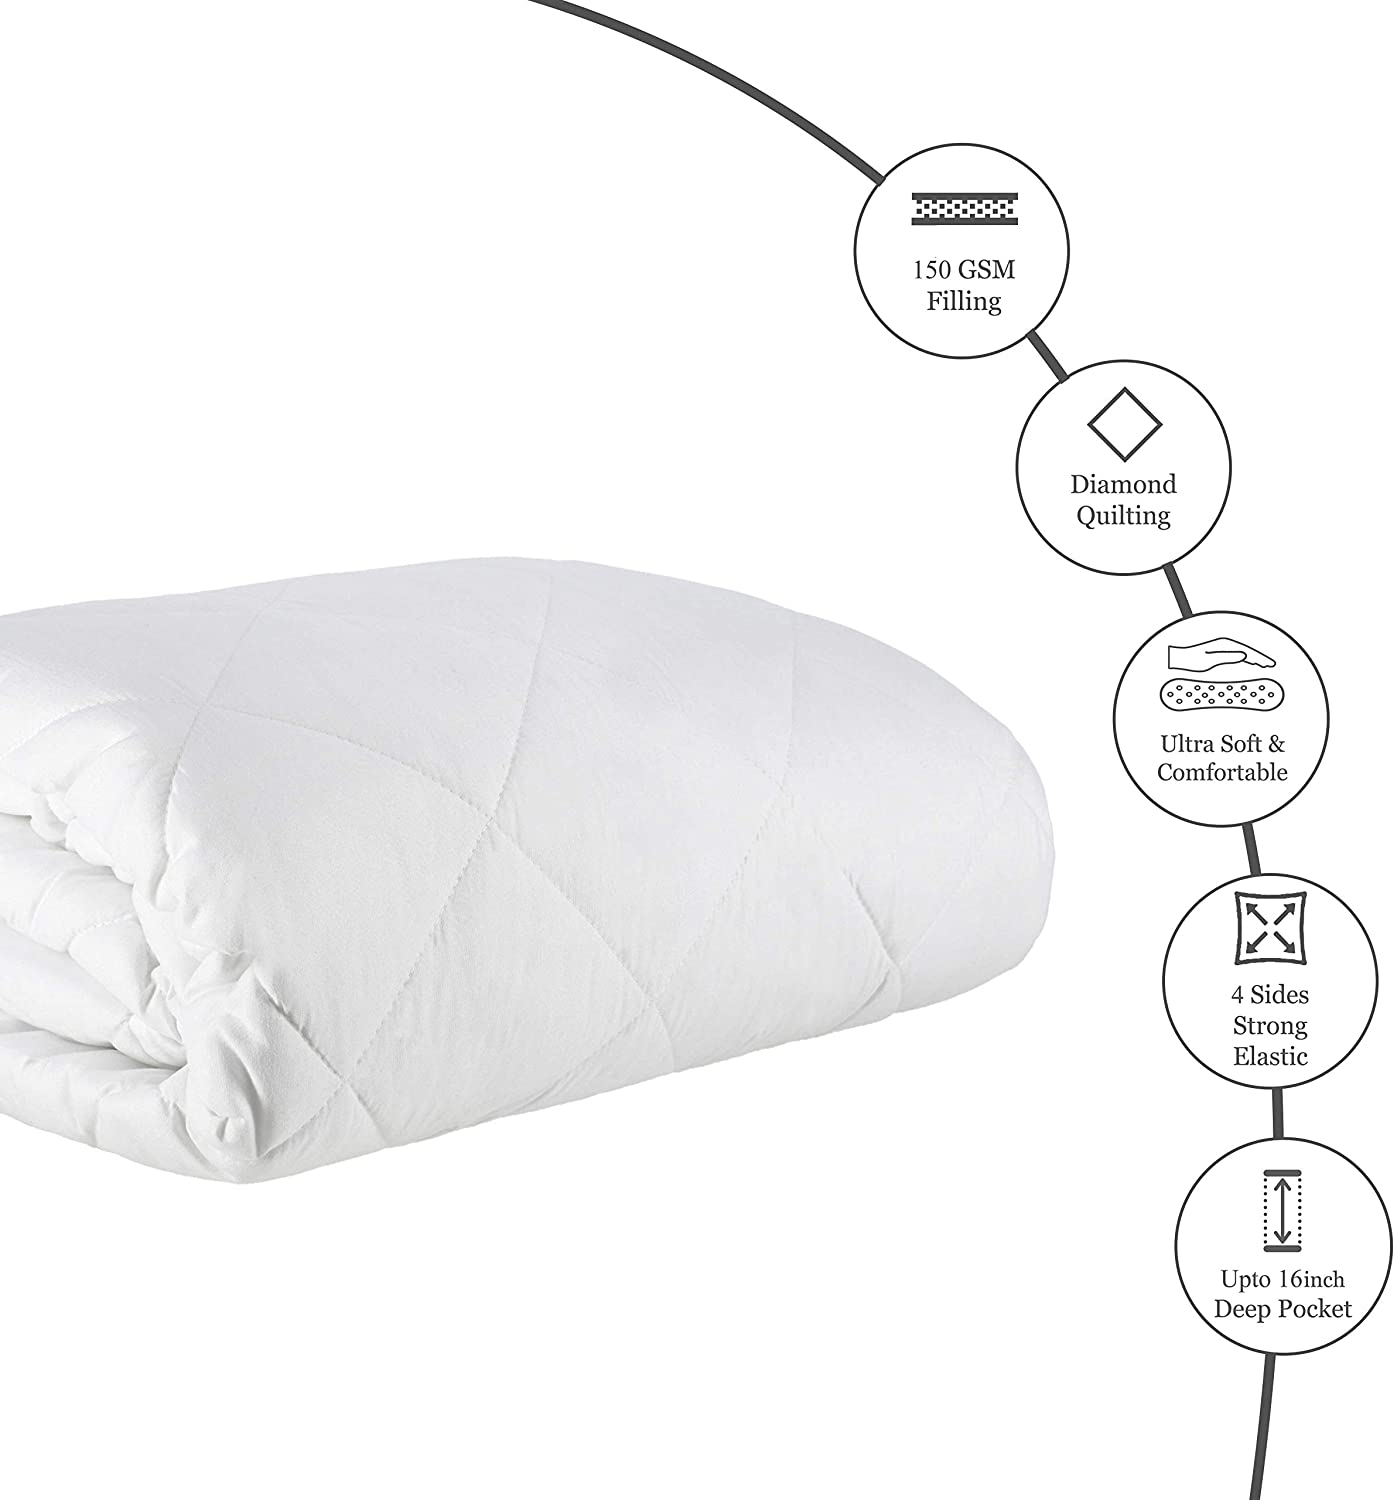 Mea Cama Quilted Mattress Topper Pad Fitted Cover - Fits 16 inch Deep Mattress (Full)